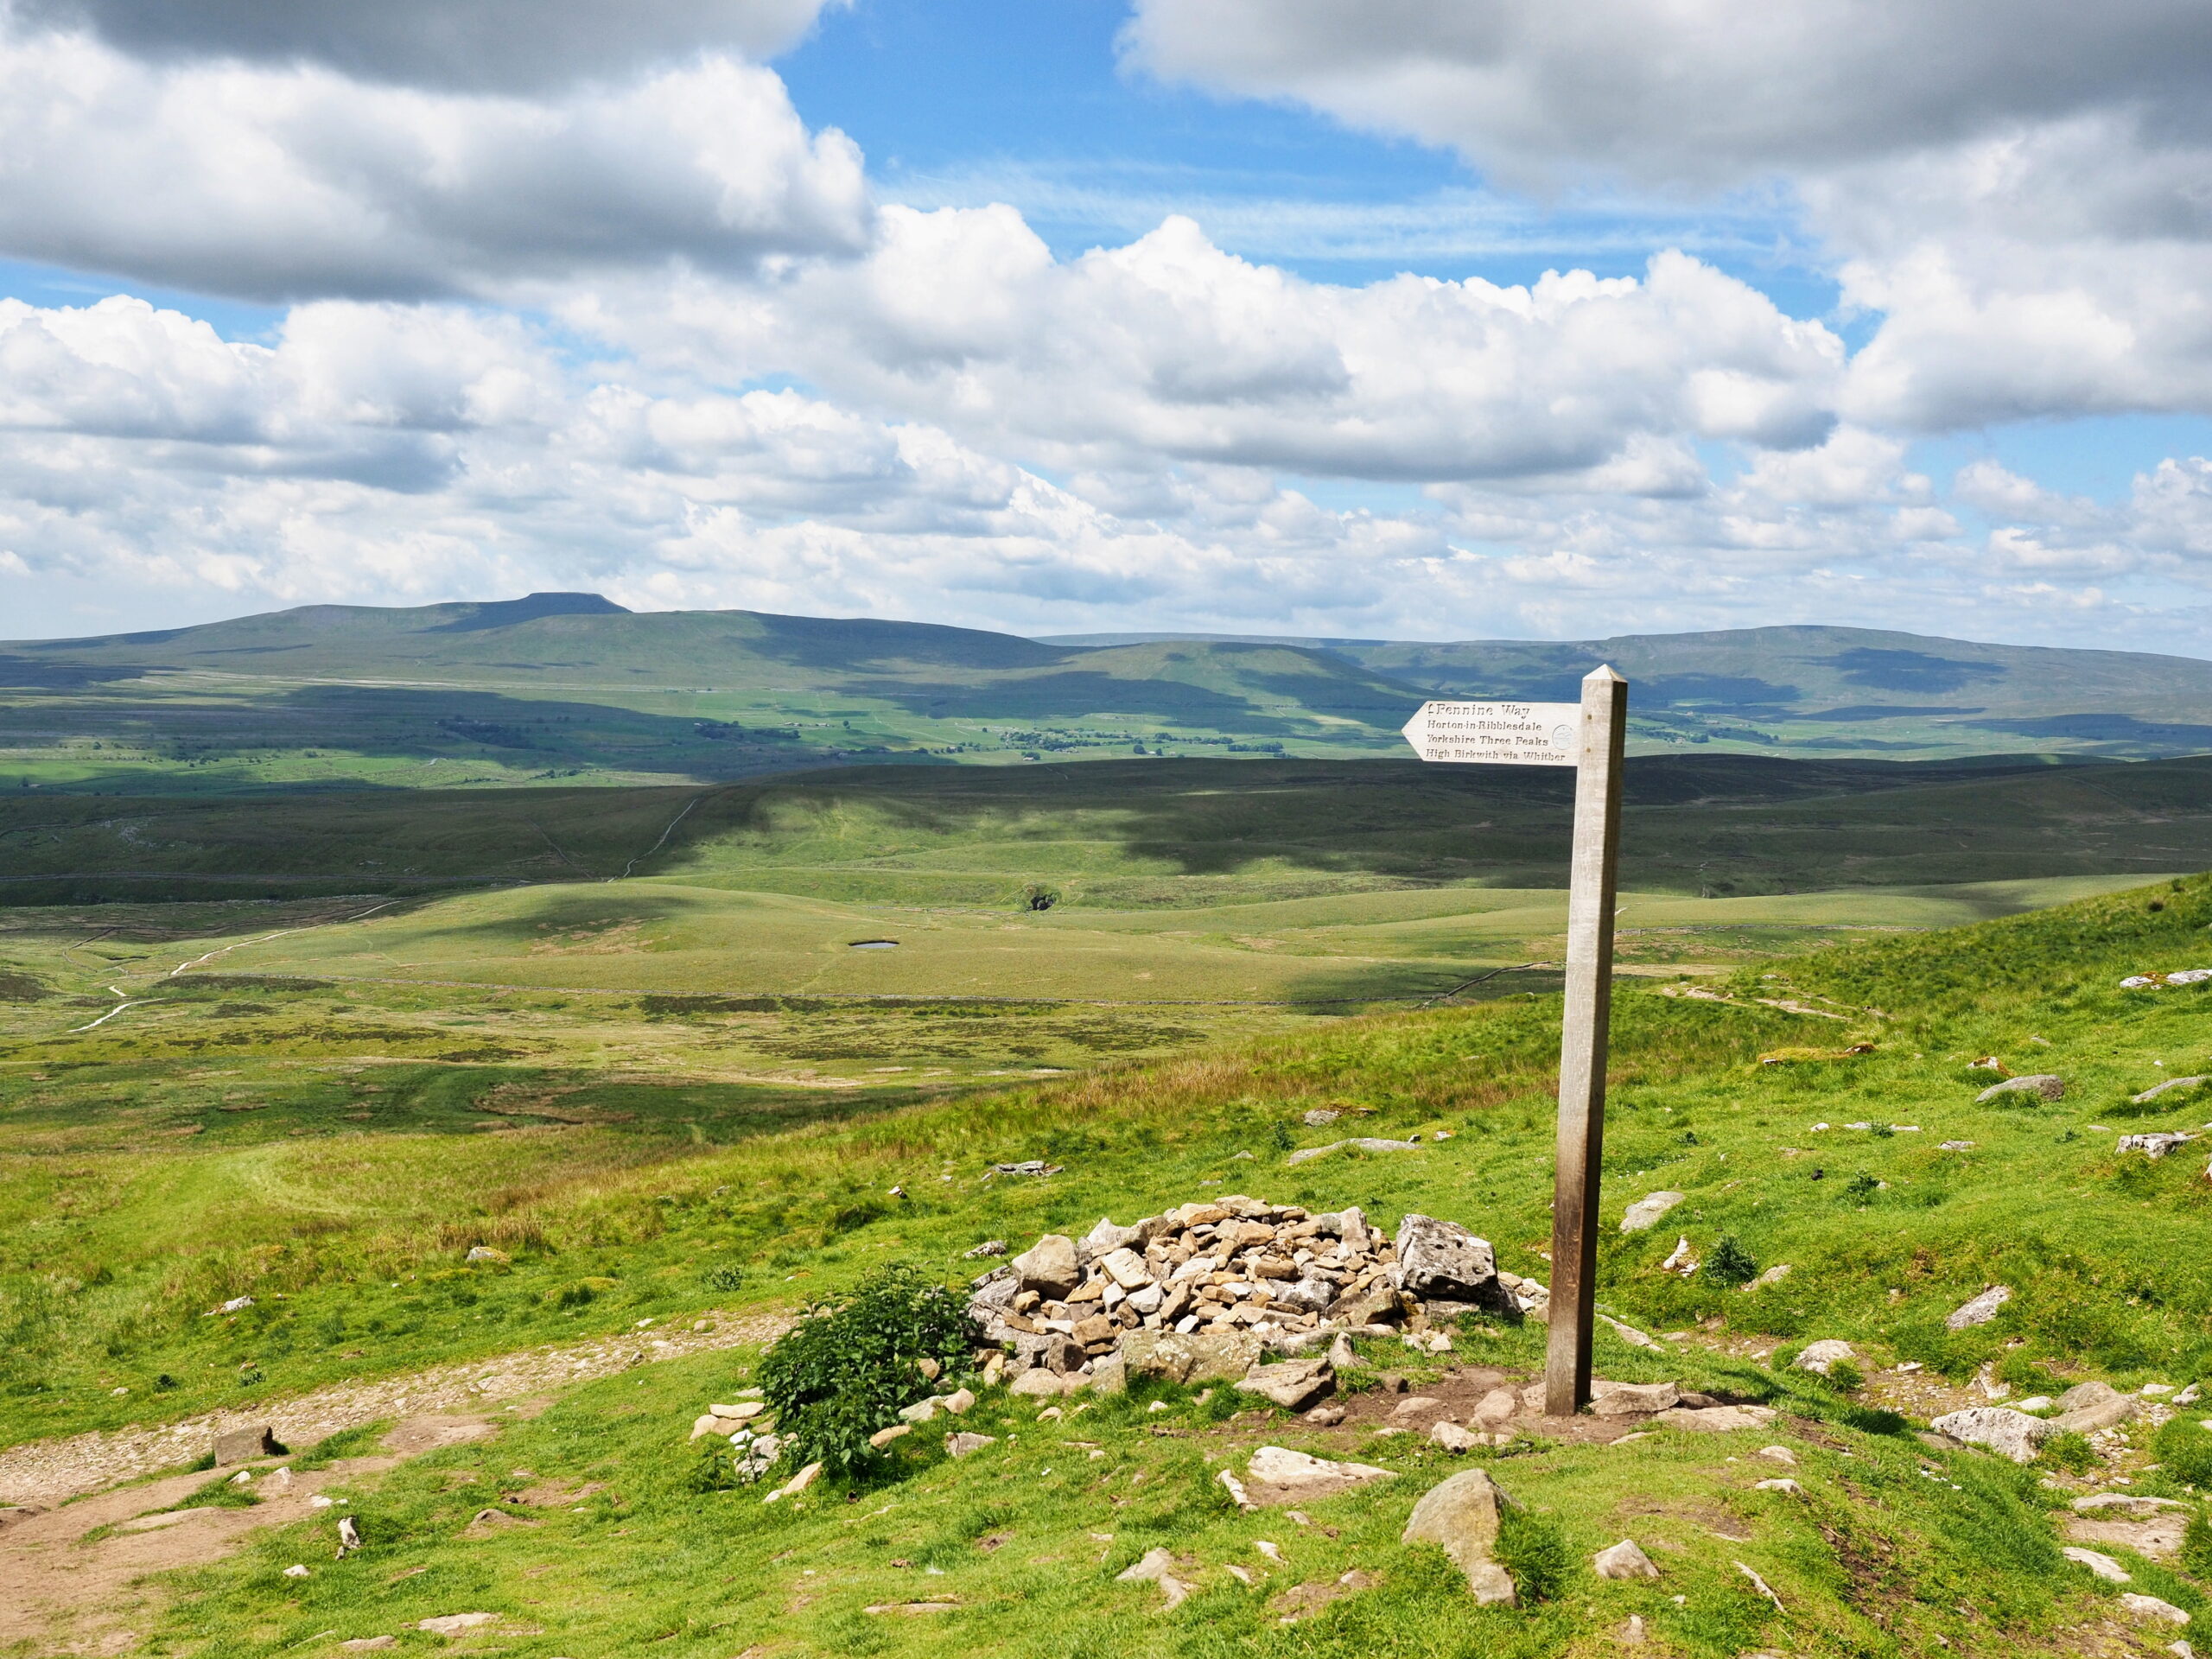 Bluebell Wood launches its own Yorkshire Three Peaks Challenge